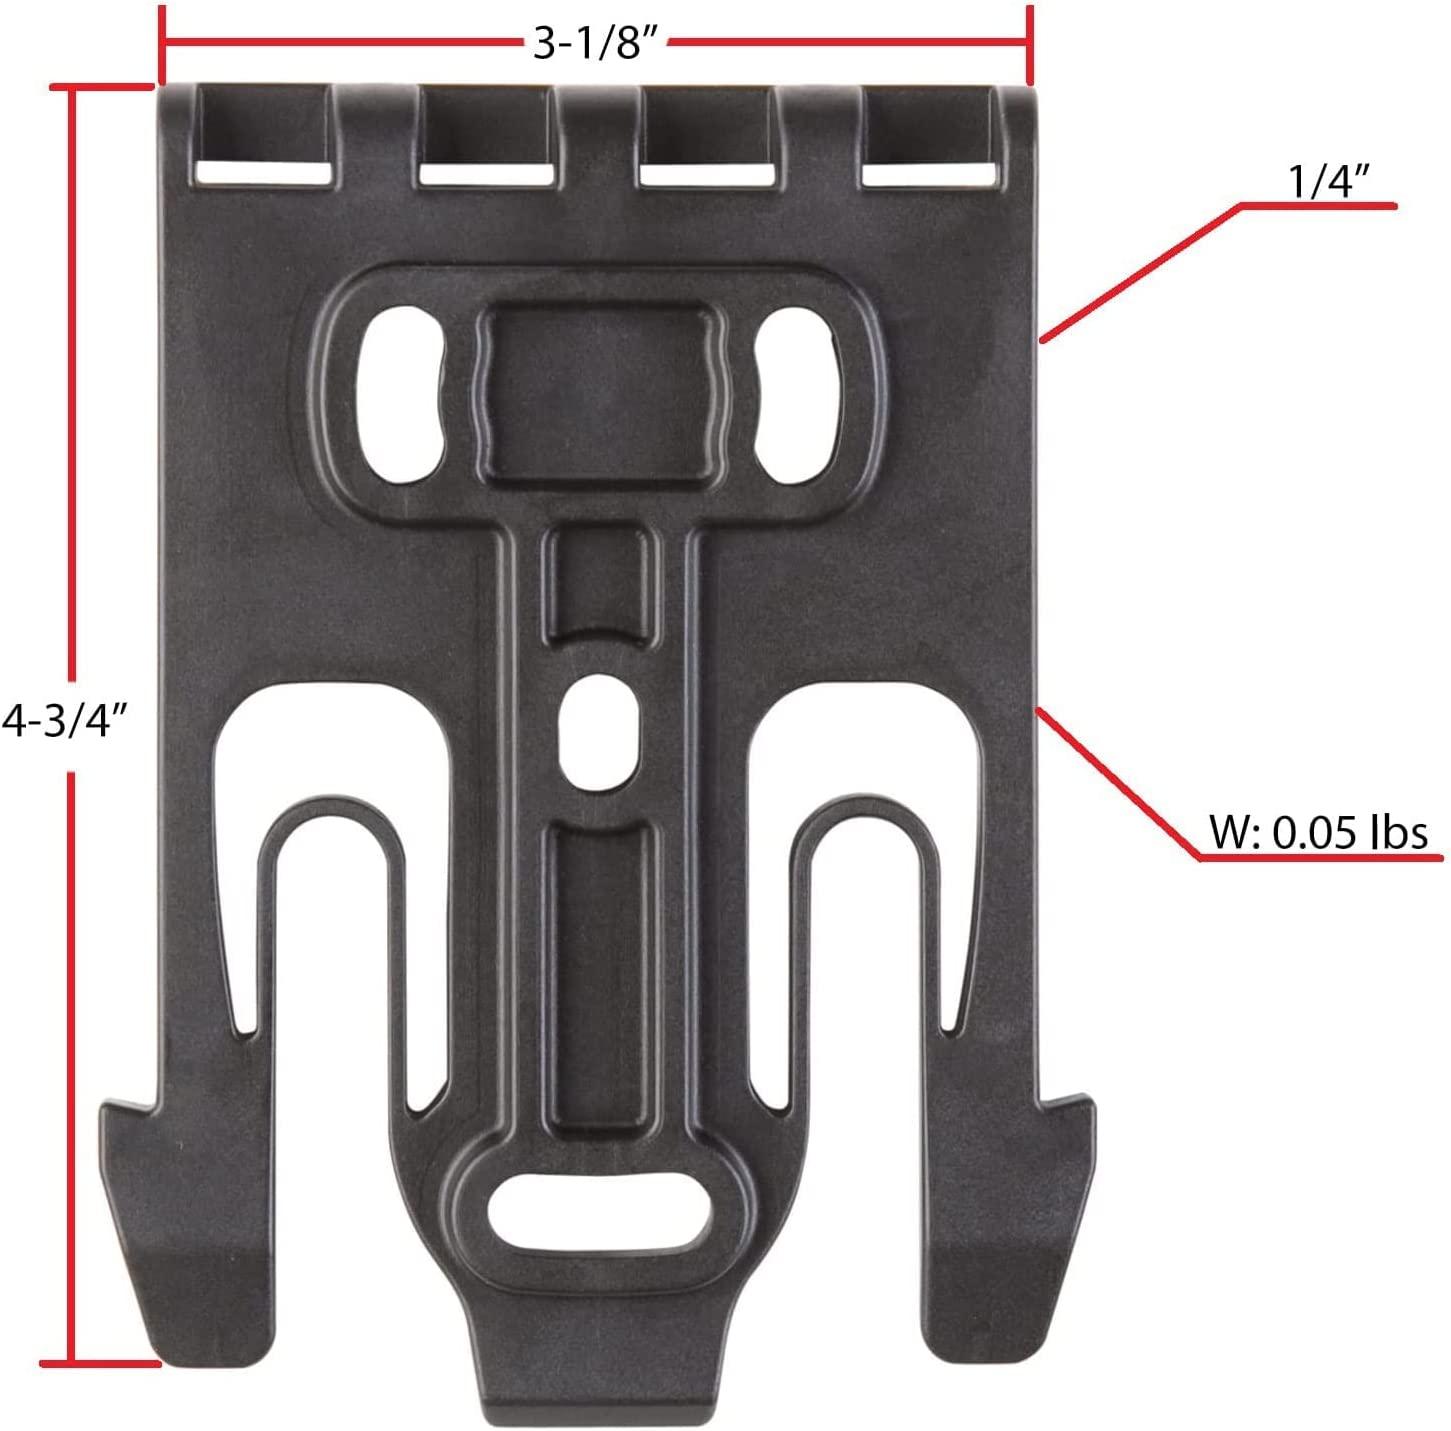  QLS Quick Locking System Kit with Locking Fork and Duty  Receiver Plate,Holstopia Polymer Attachment for Duty Holsters and  Accessories-Black : Sports & Outdoors